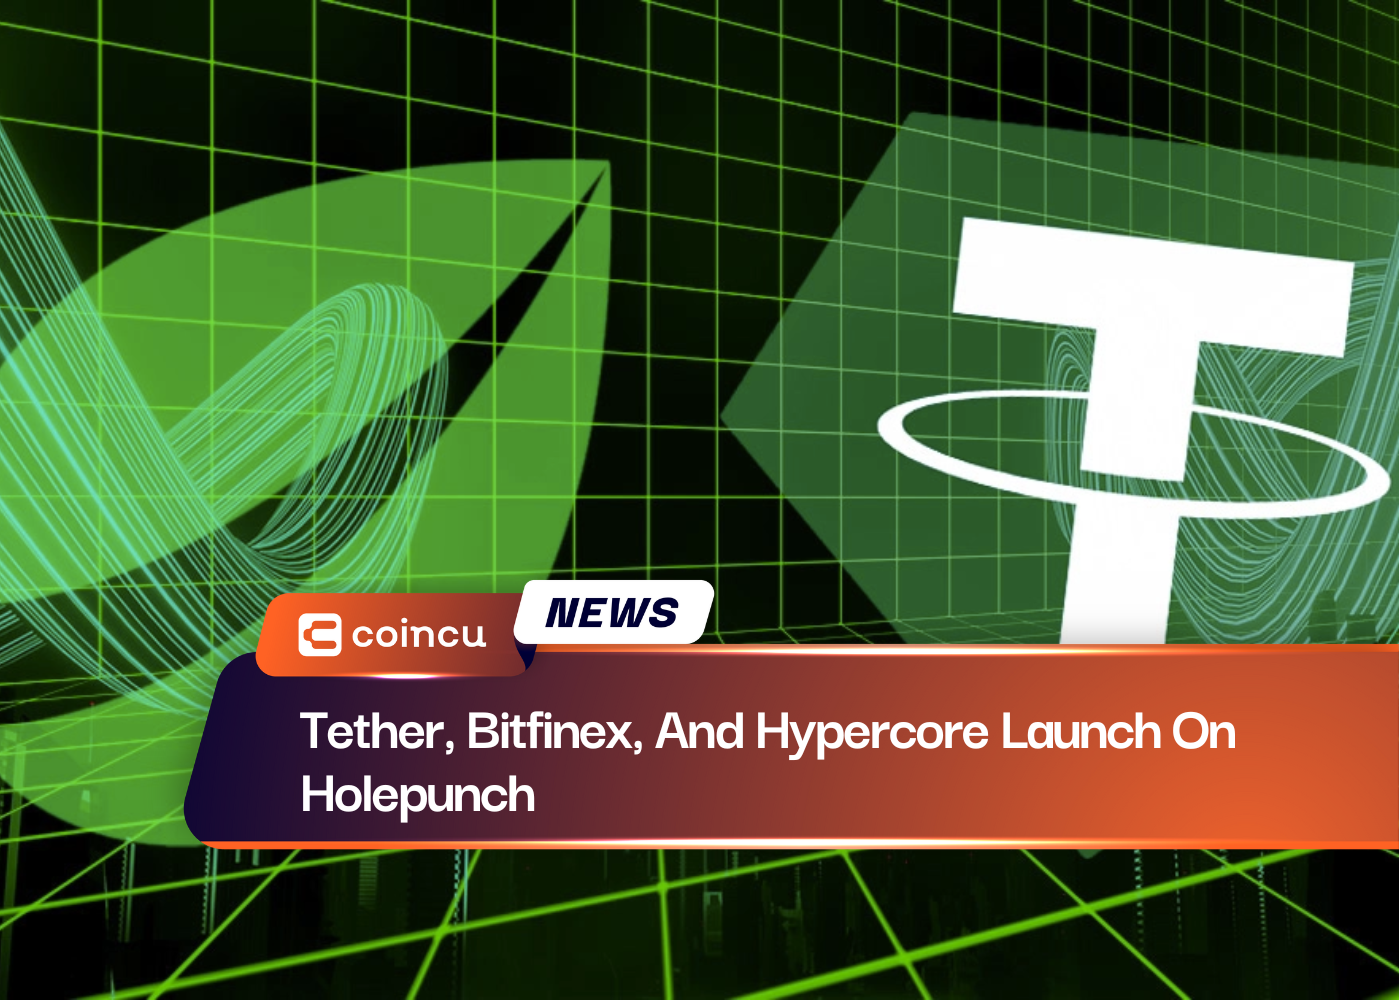 Tether, Bitfinex, And Hypercore Launch On Holepunch